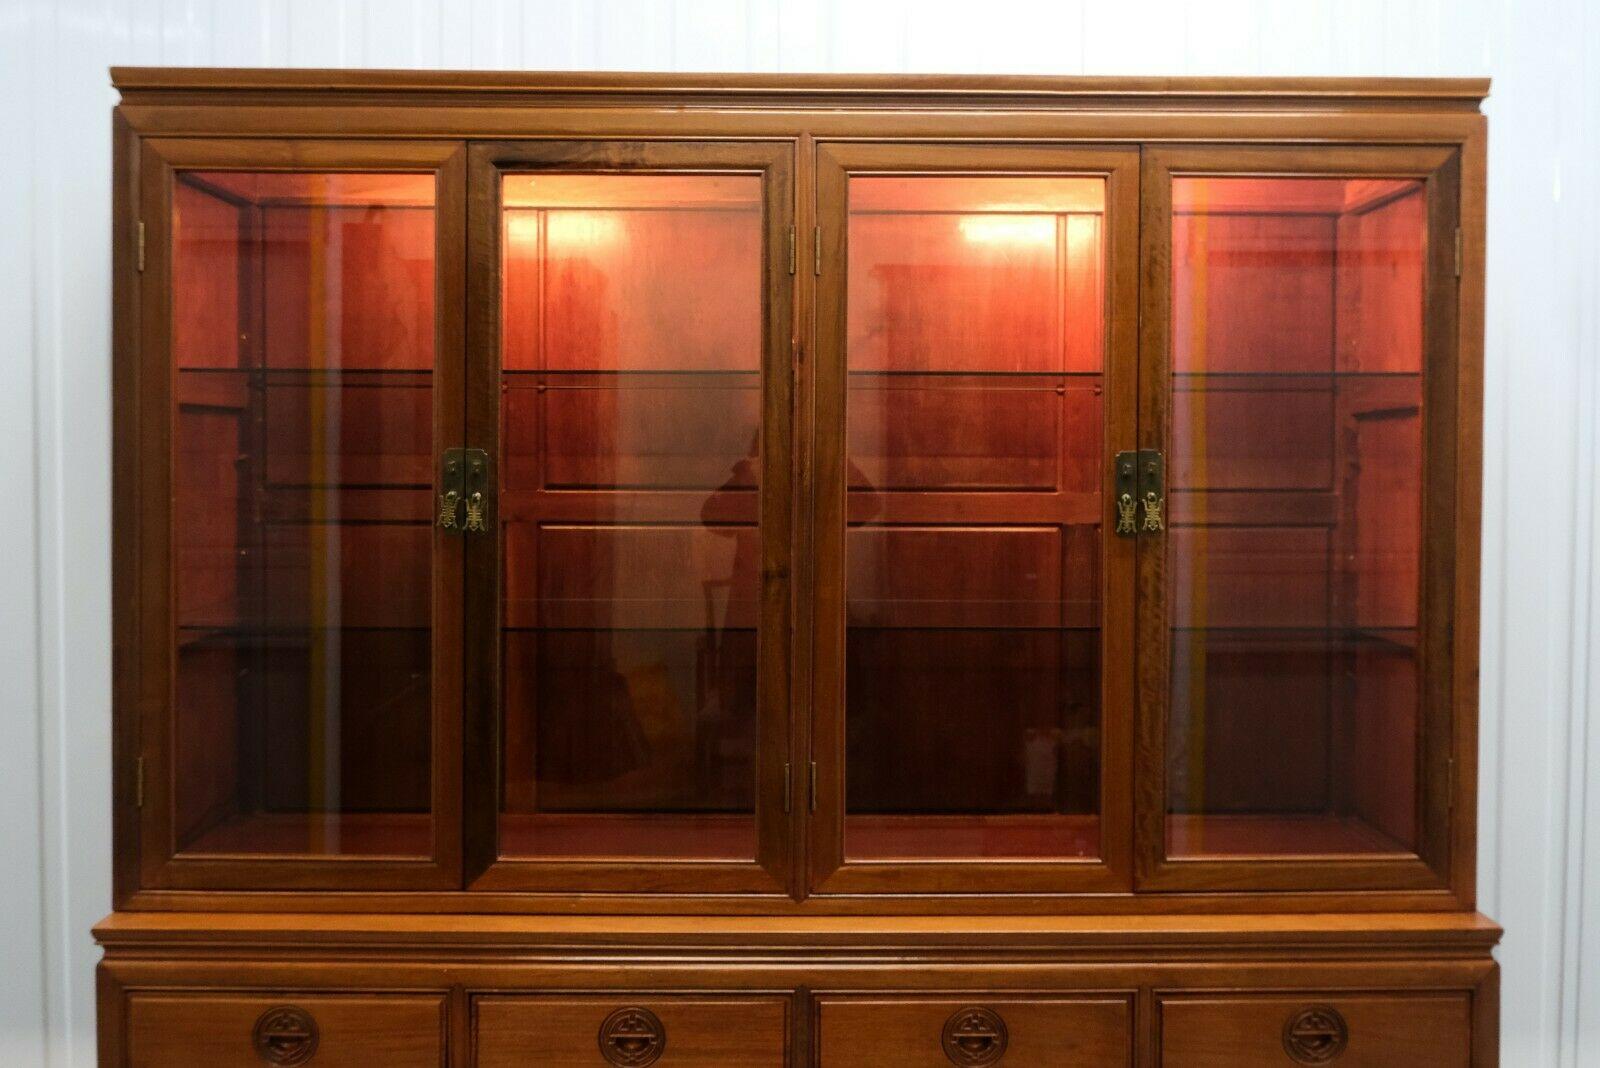 English Stunning Chinese Hardwood Sideboard with Glass Shelves Carving Details & Lights